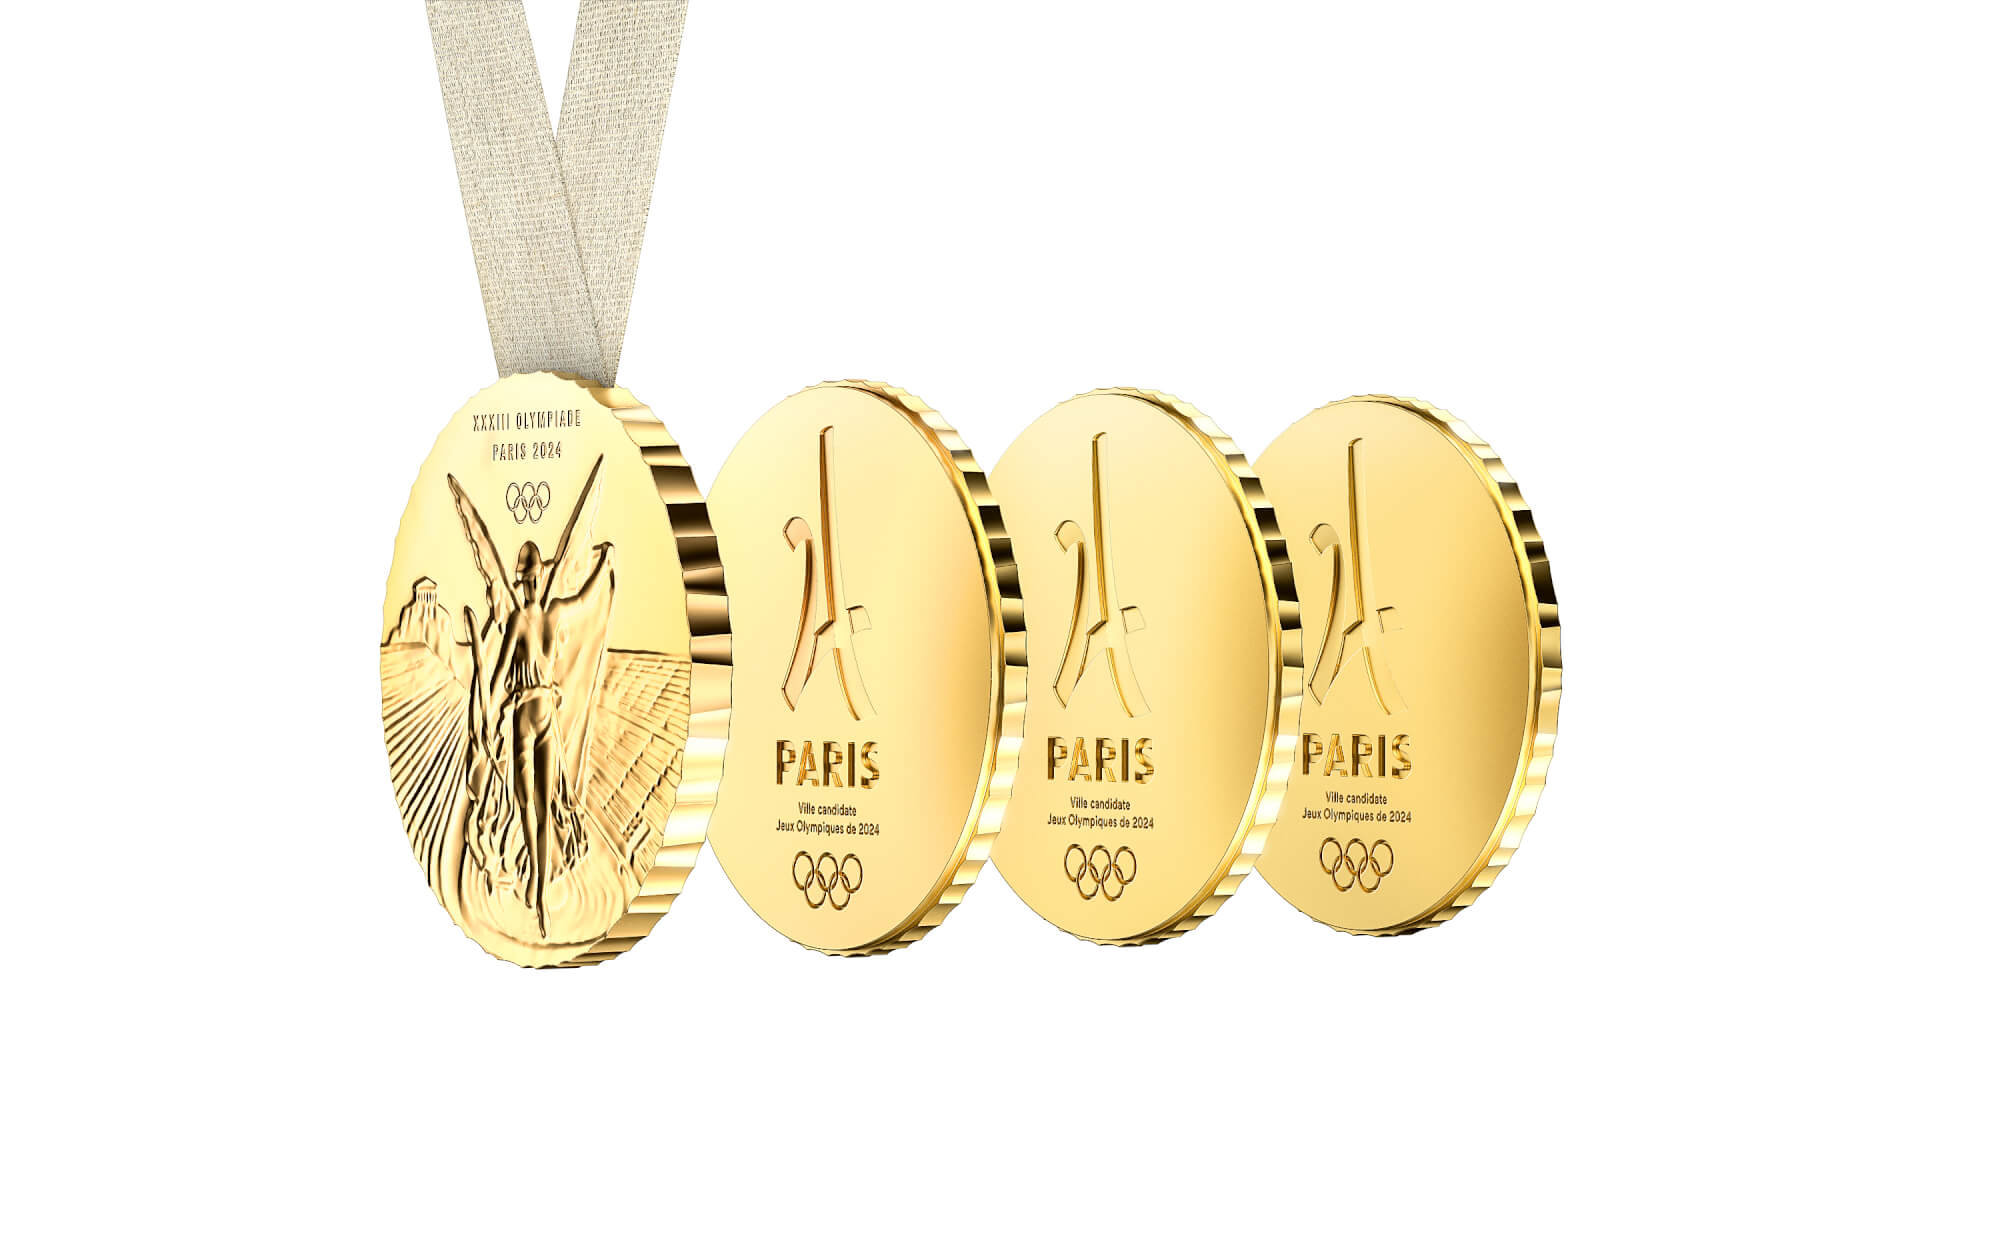 Medal project for the 2024 Paris Olympics Games: a medal to be shared, for real